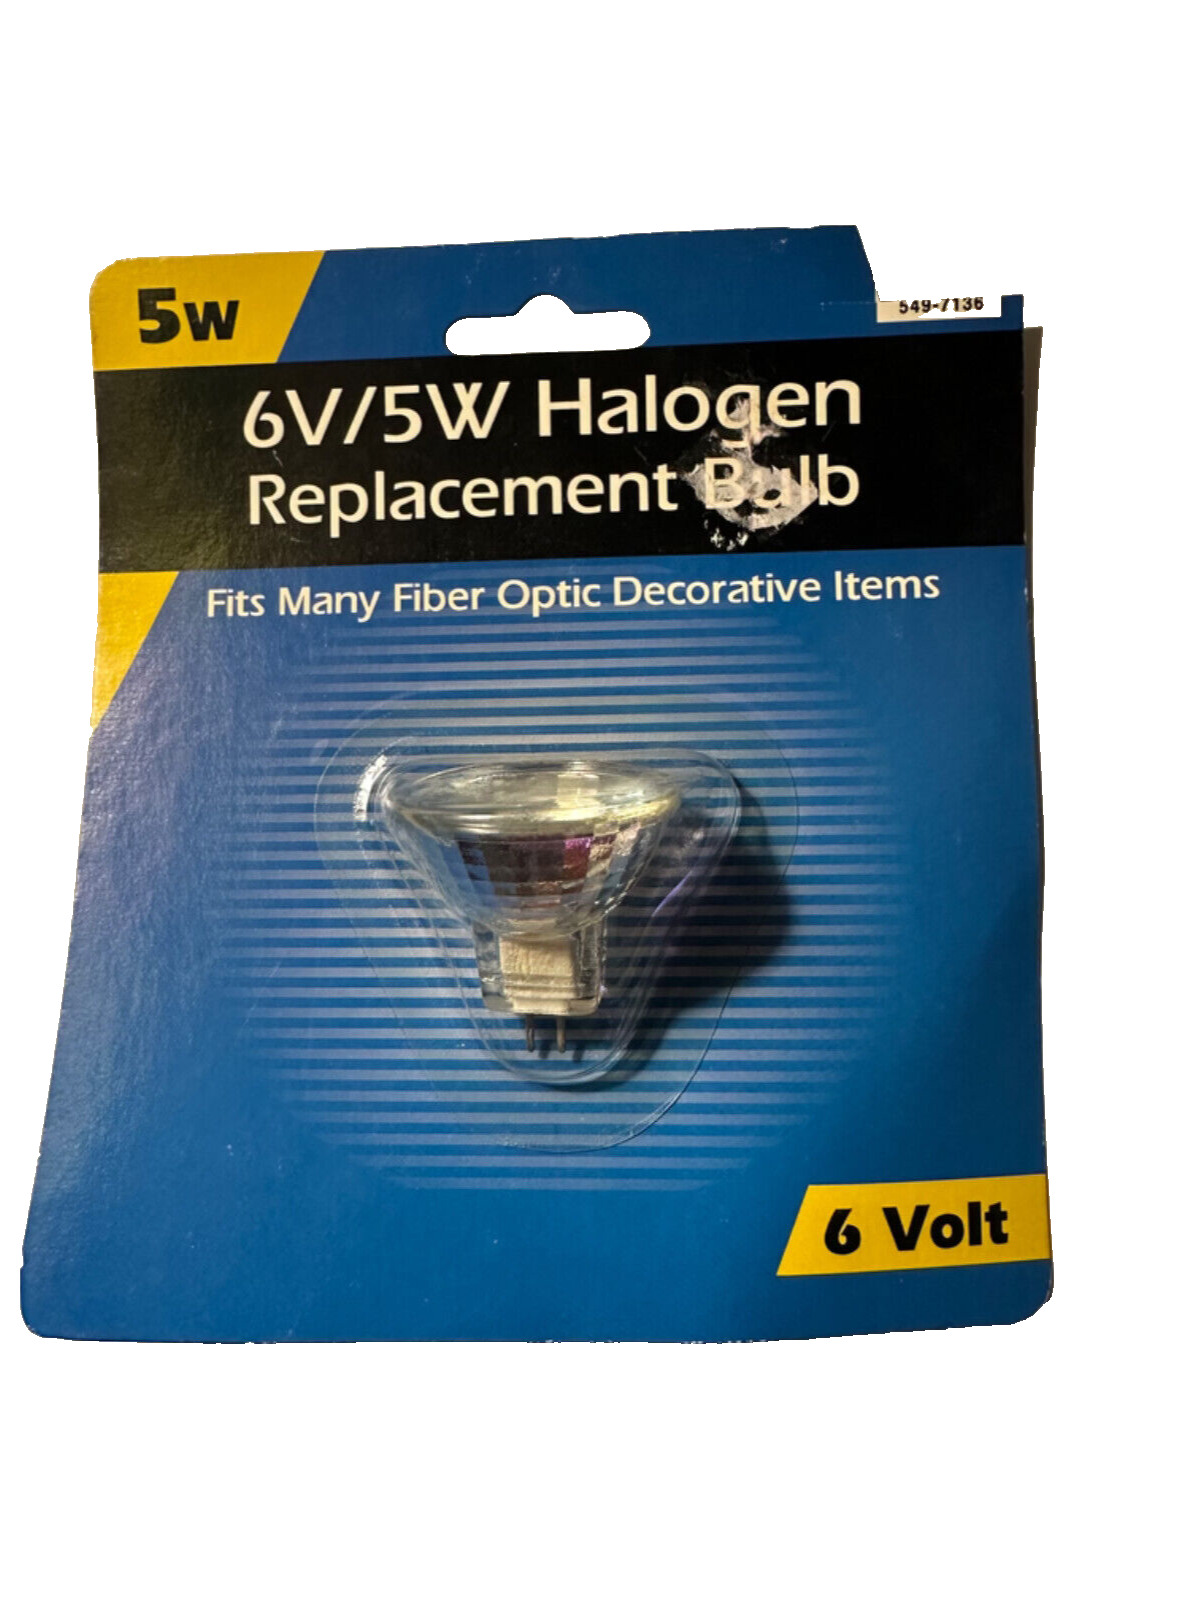 HALOGEN REPLACEMENT BULB For VINTAGE FIBER OPTIC TREES & FIGURES Small 6V/5W